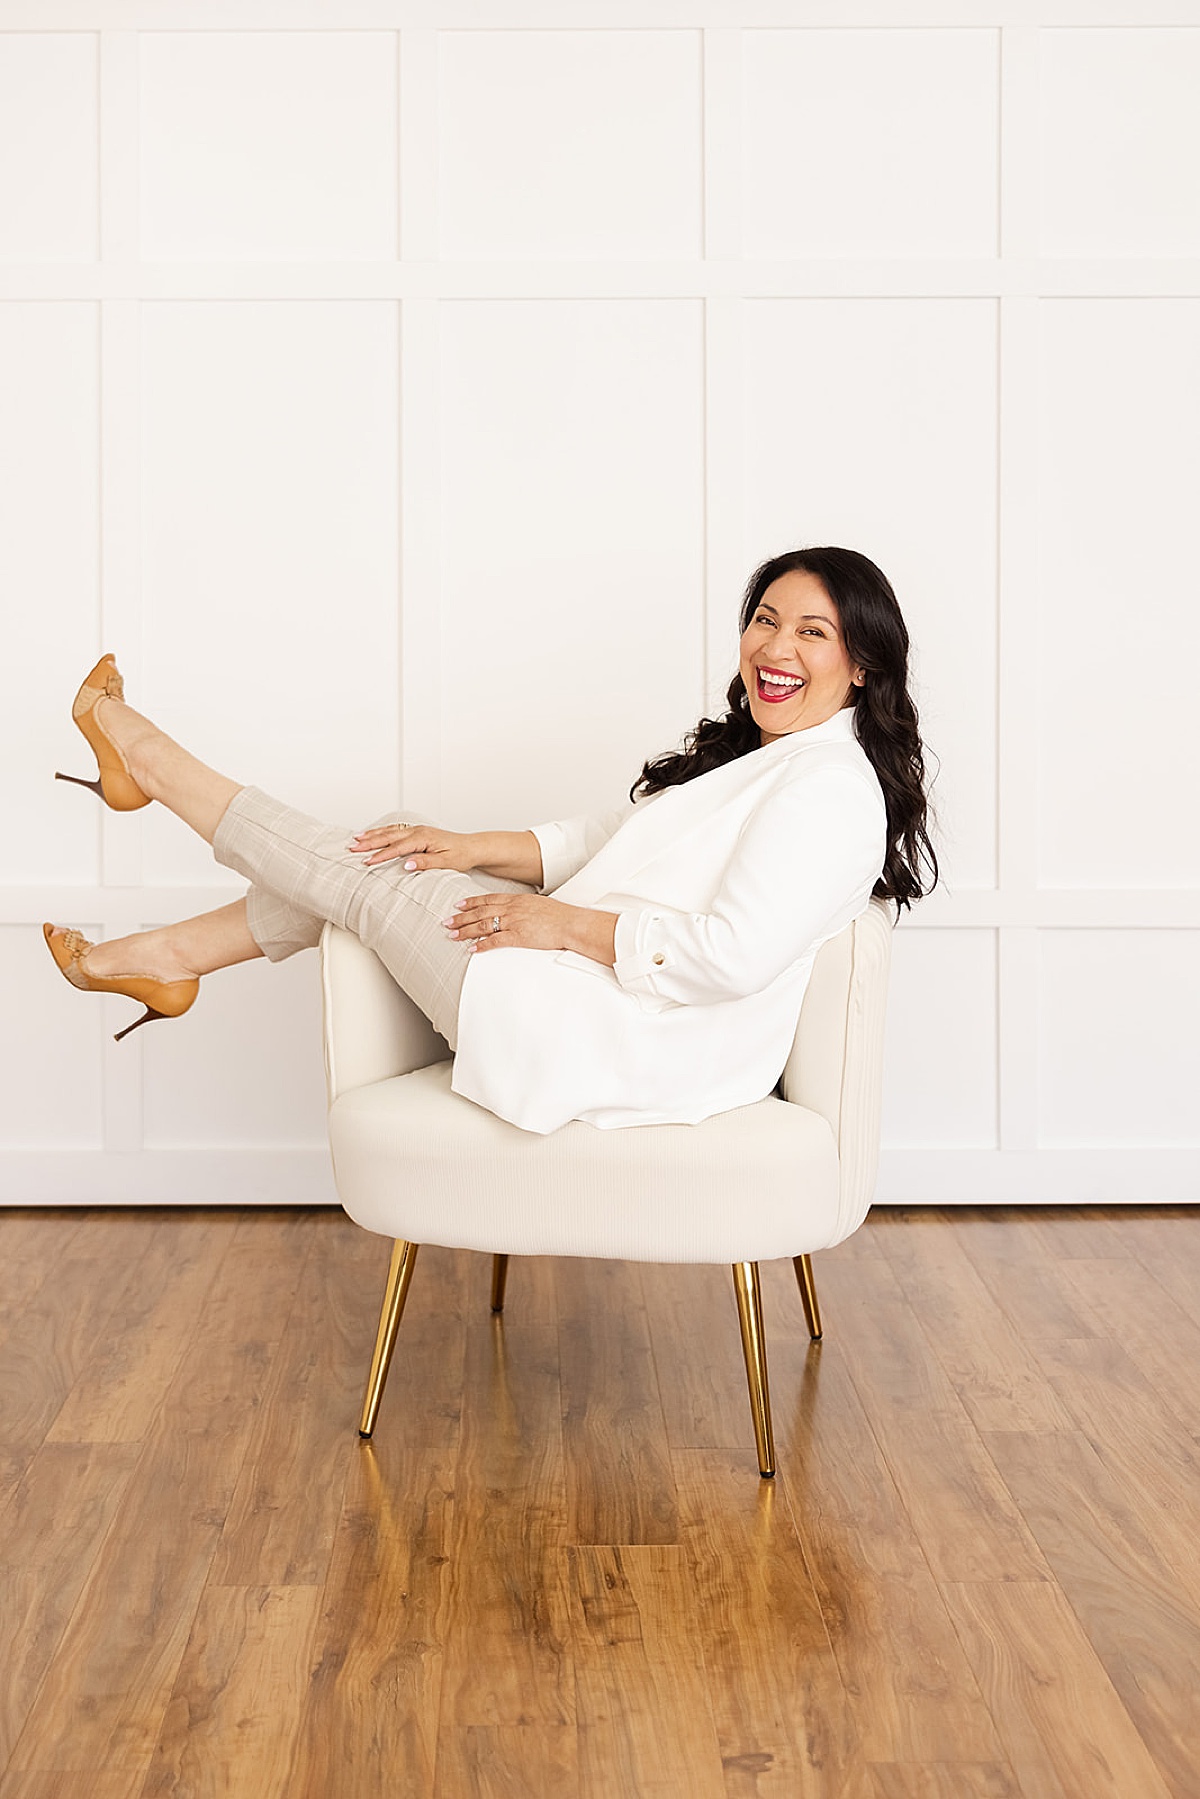 women sitting on chair having fun and smiling for a San Francisco Branding Photographer